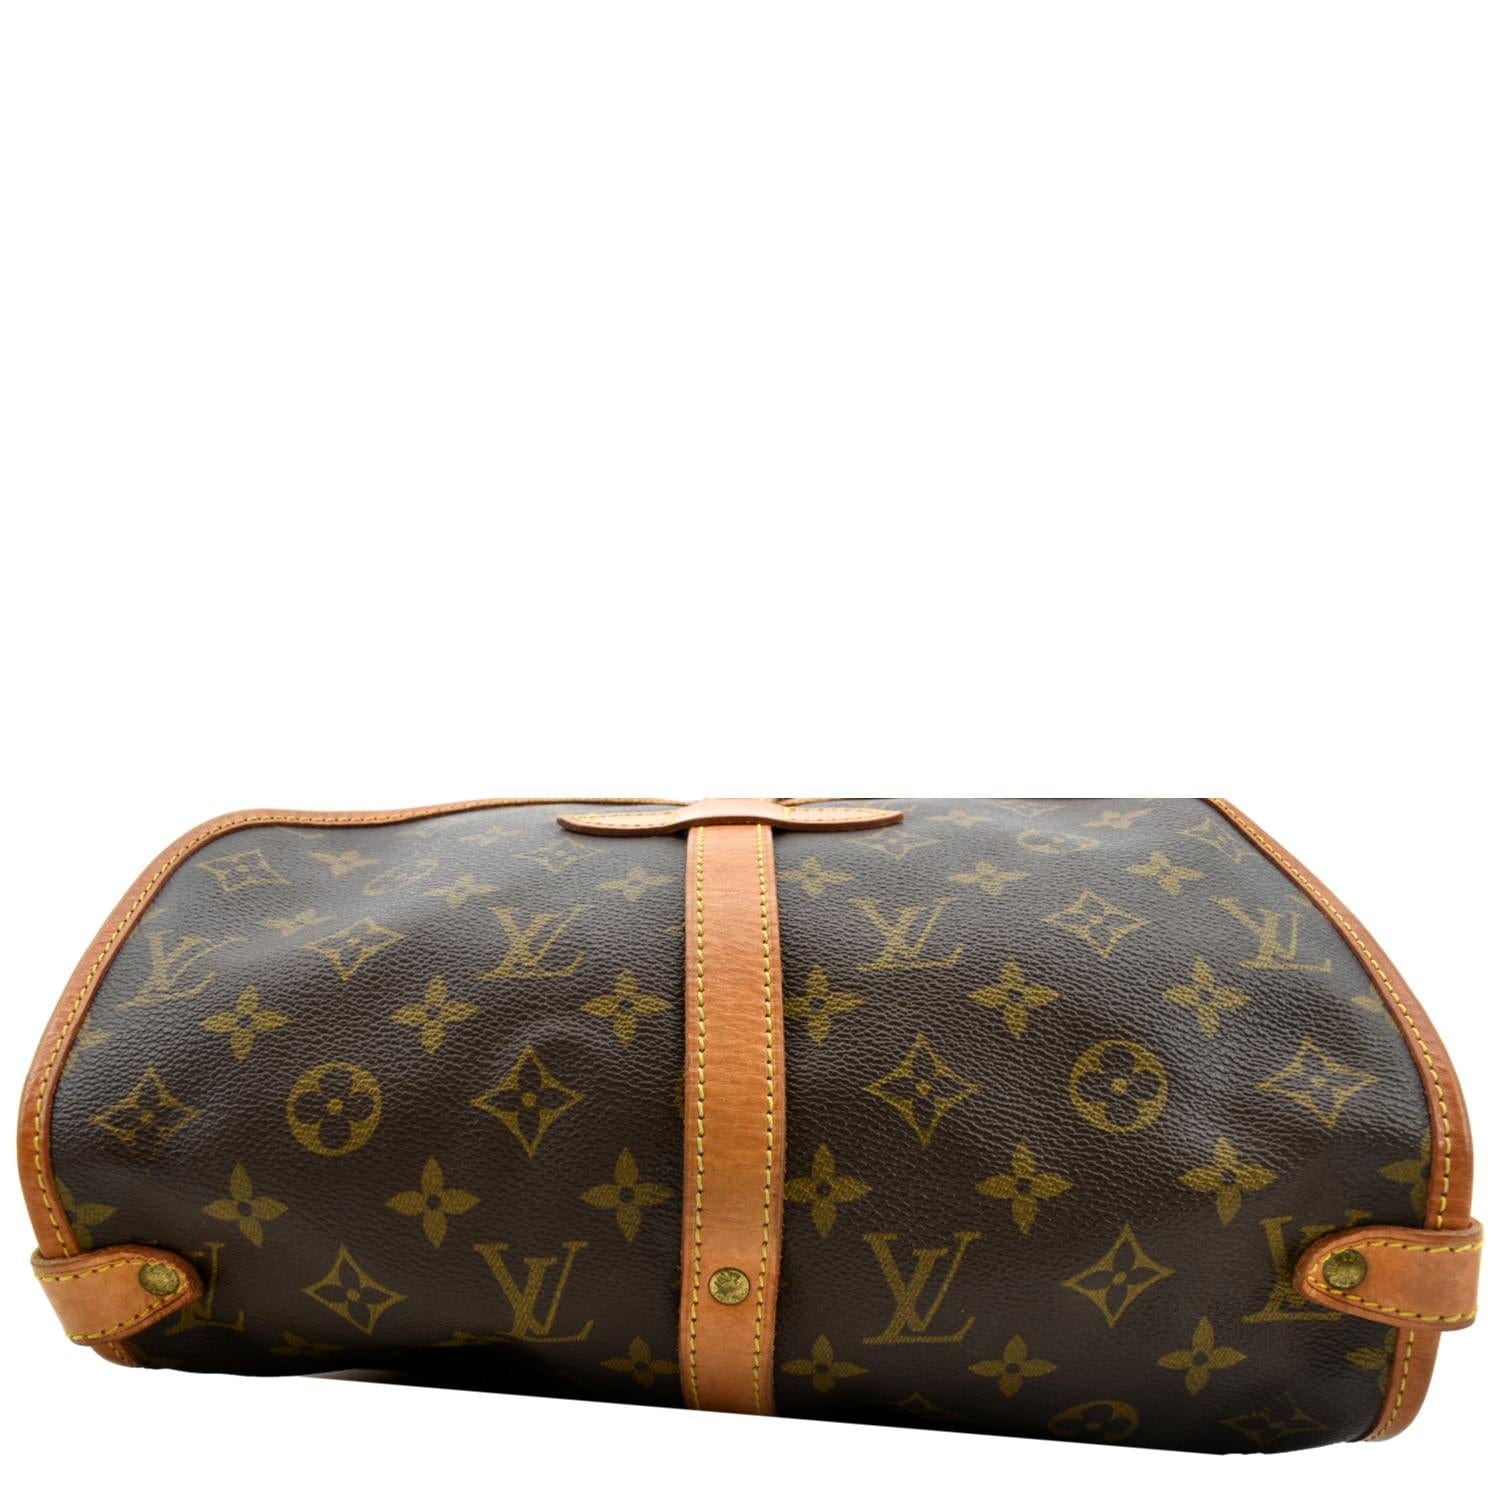 NEW NEW NEW - Saumur BB in MONOGRAM!! Such a cute and practical bag fo, lv saumur bb